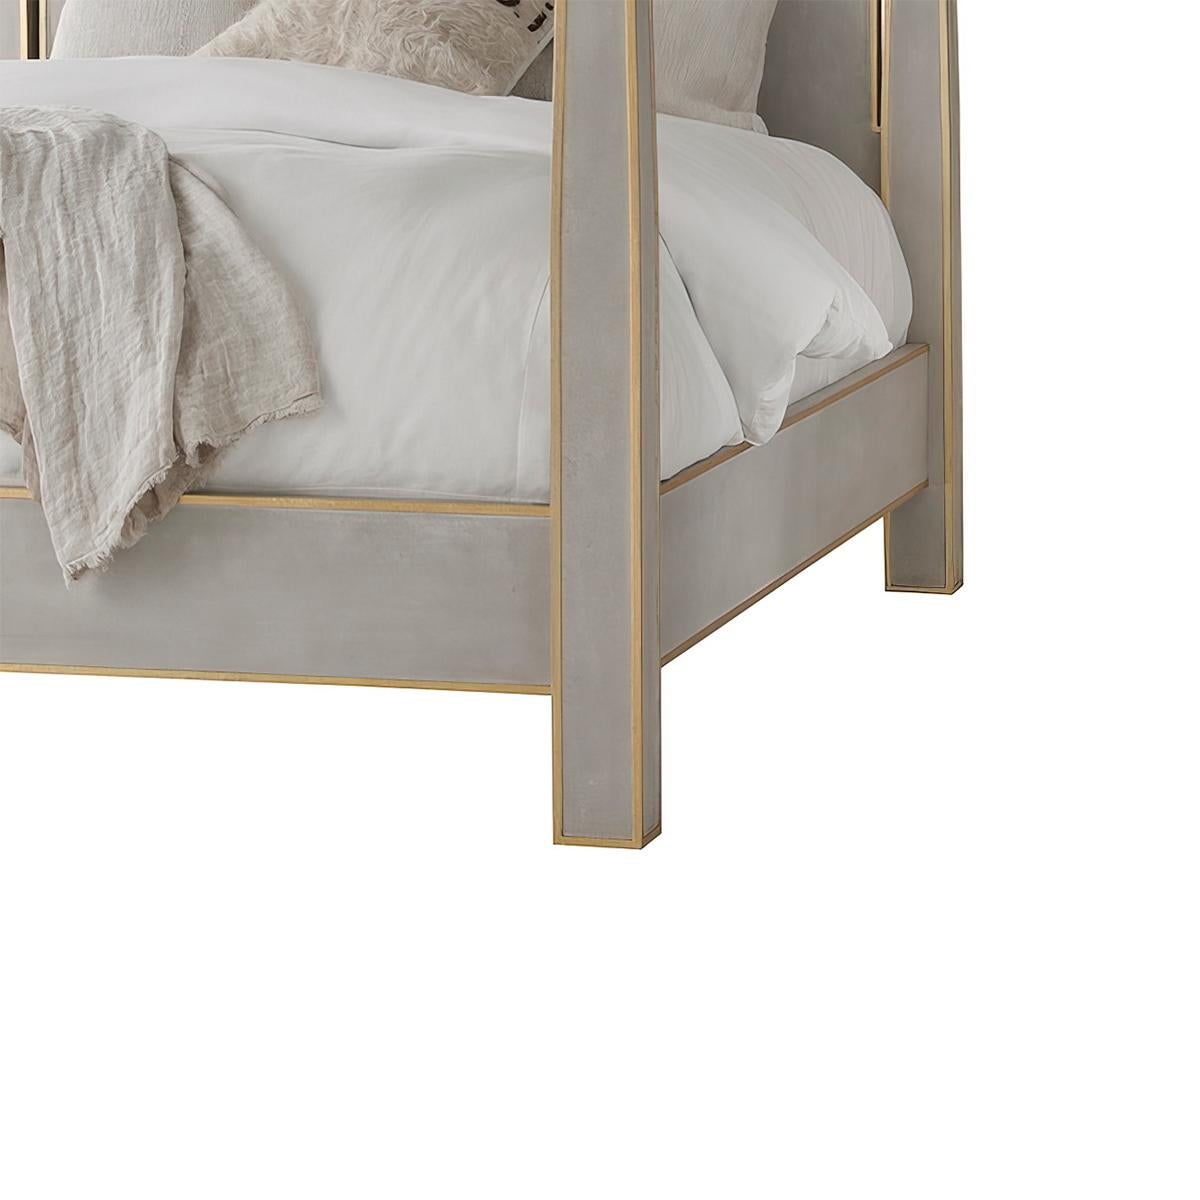 grey four poster beds